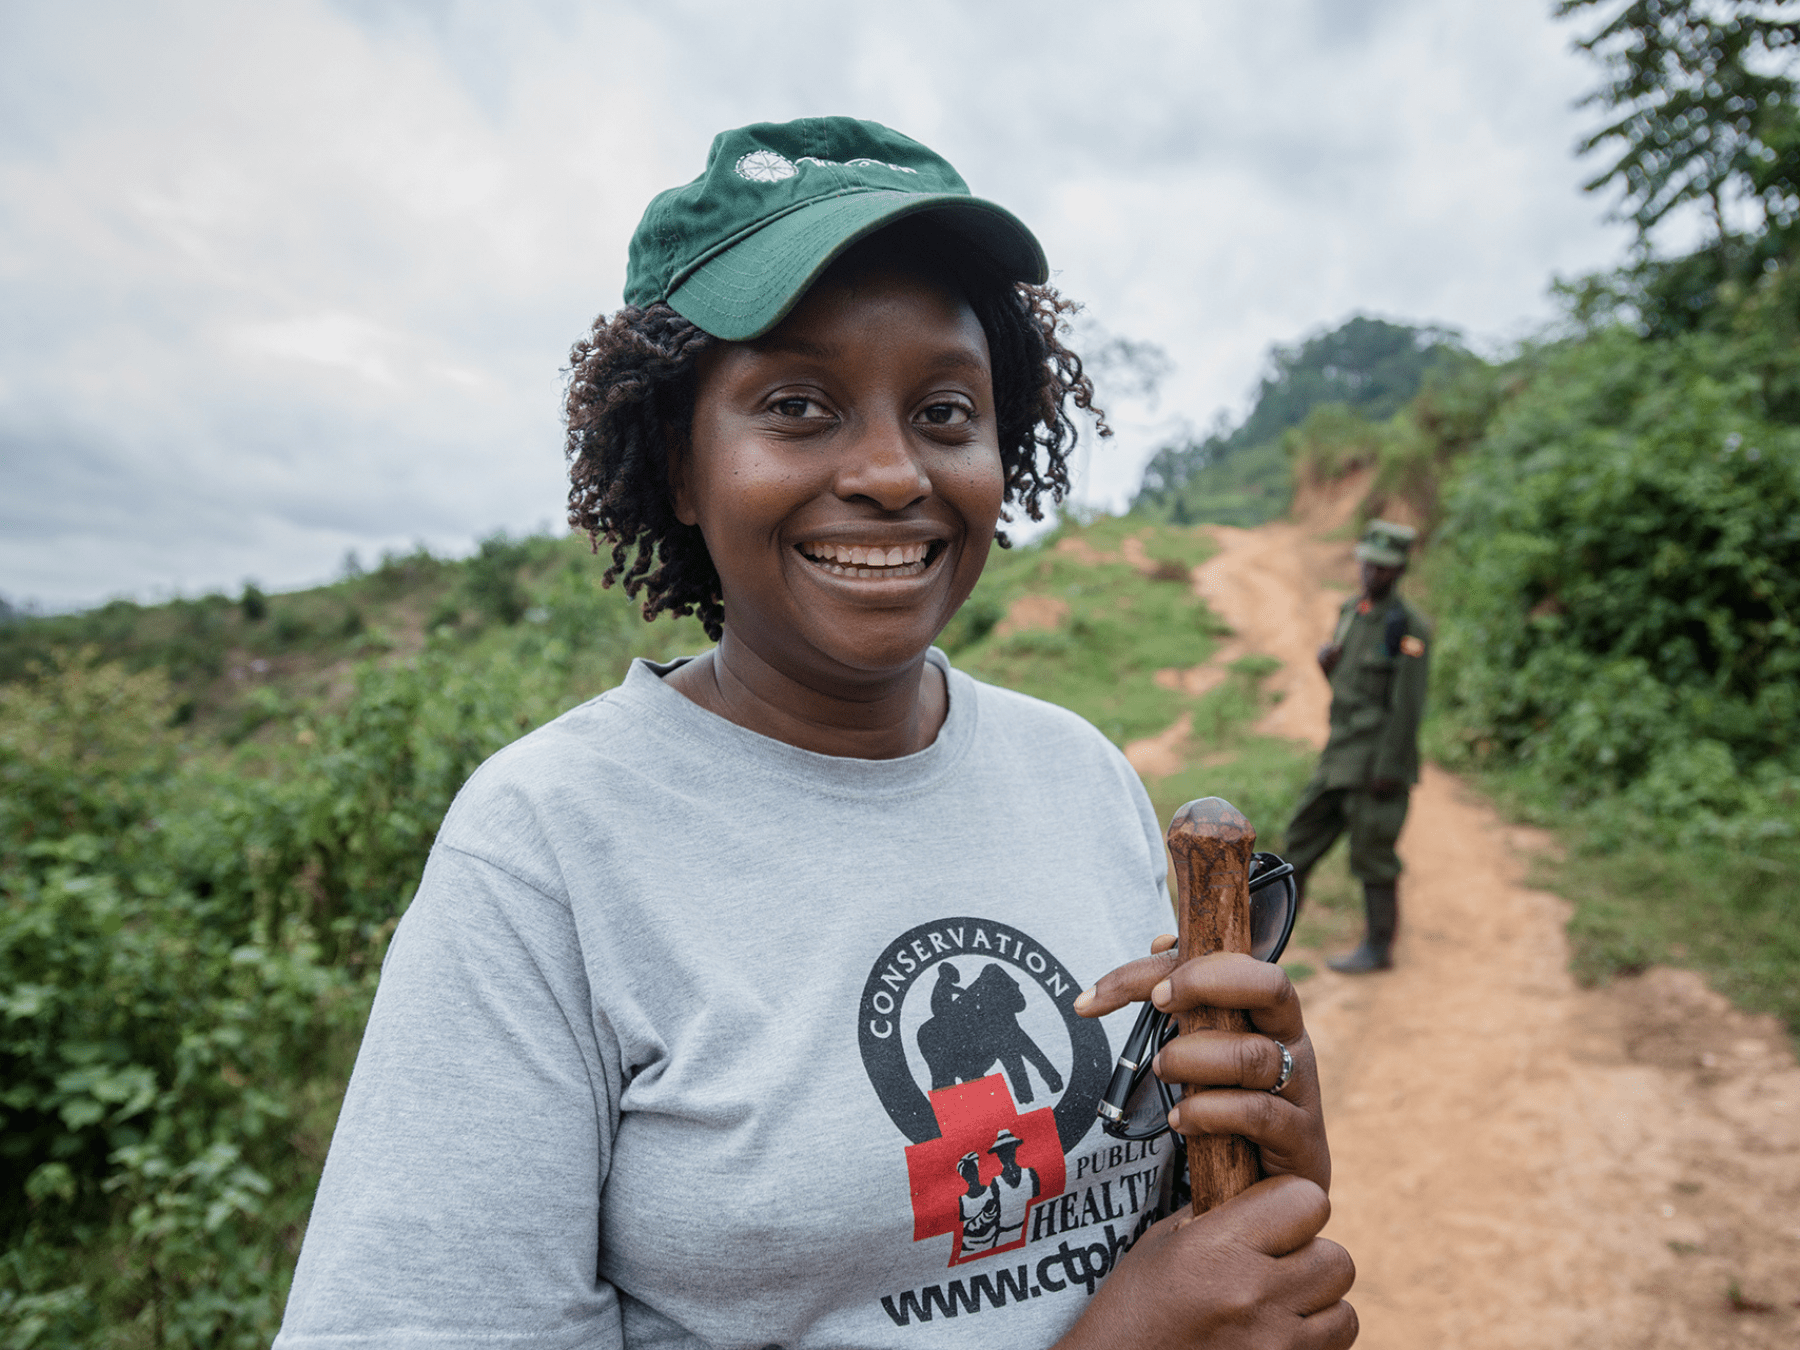 a smiling woman holding a wooden stick on a dirt road.